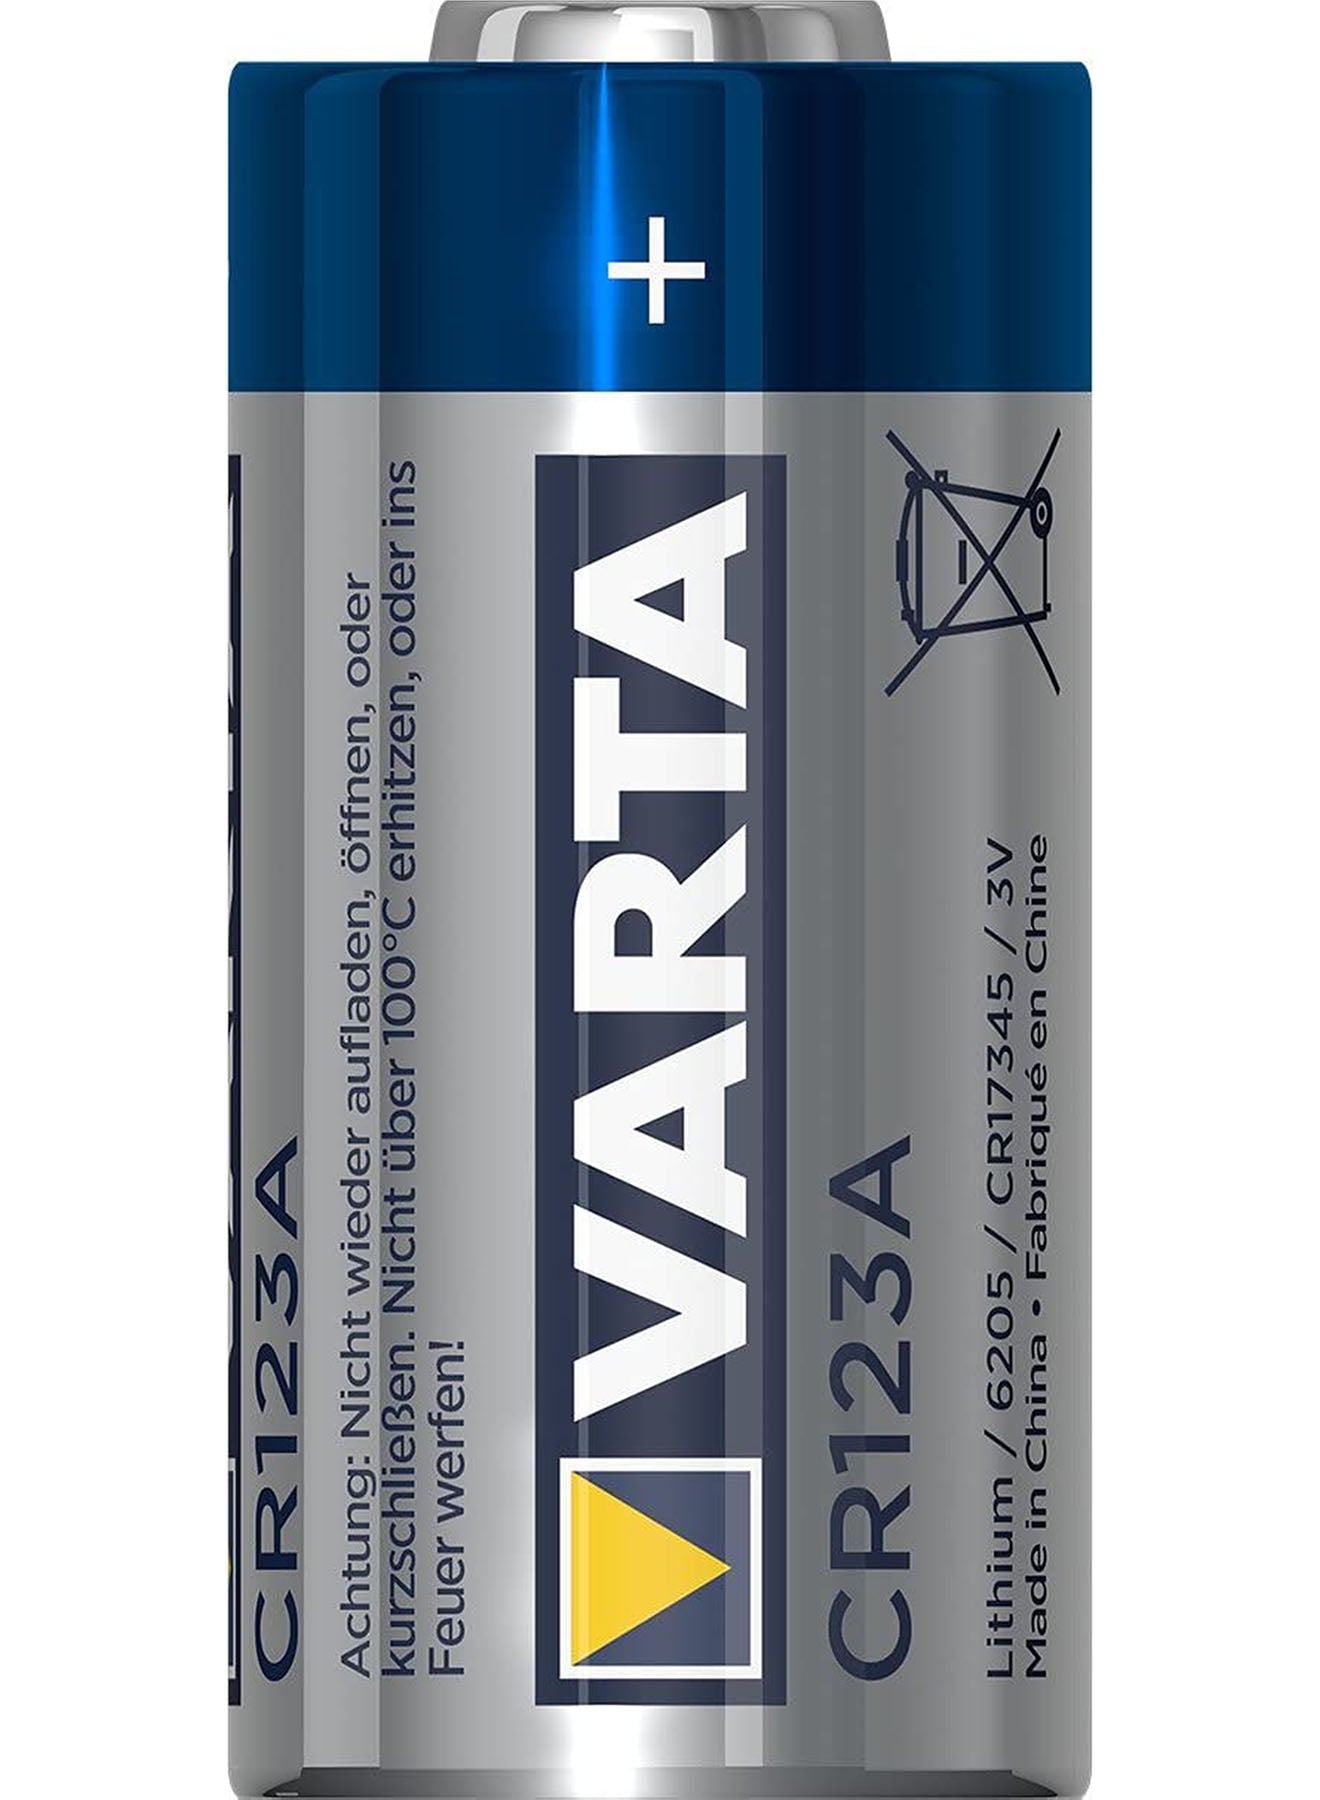 Varta Lithium CR 123A Batteries Value Pack of 4 